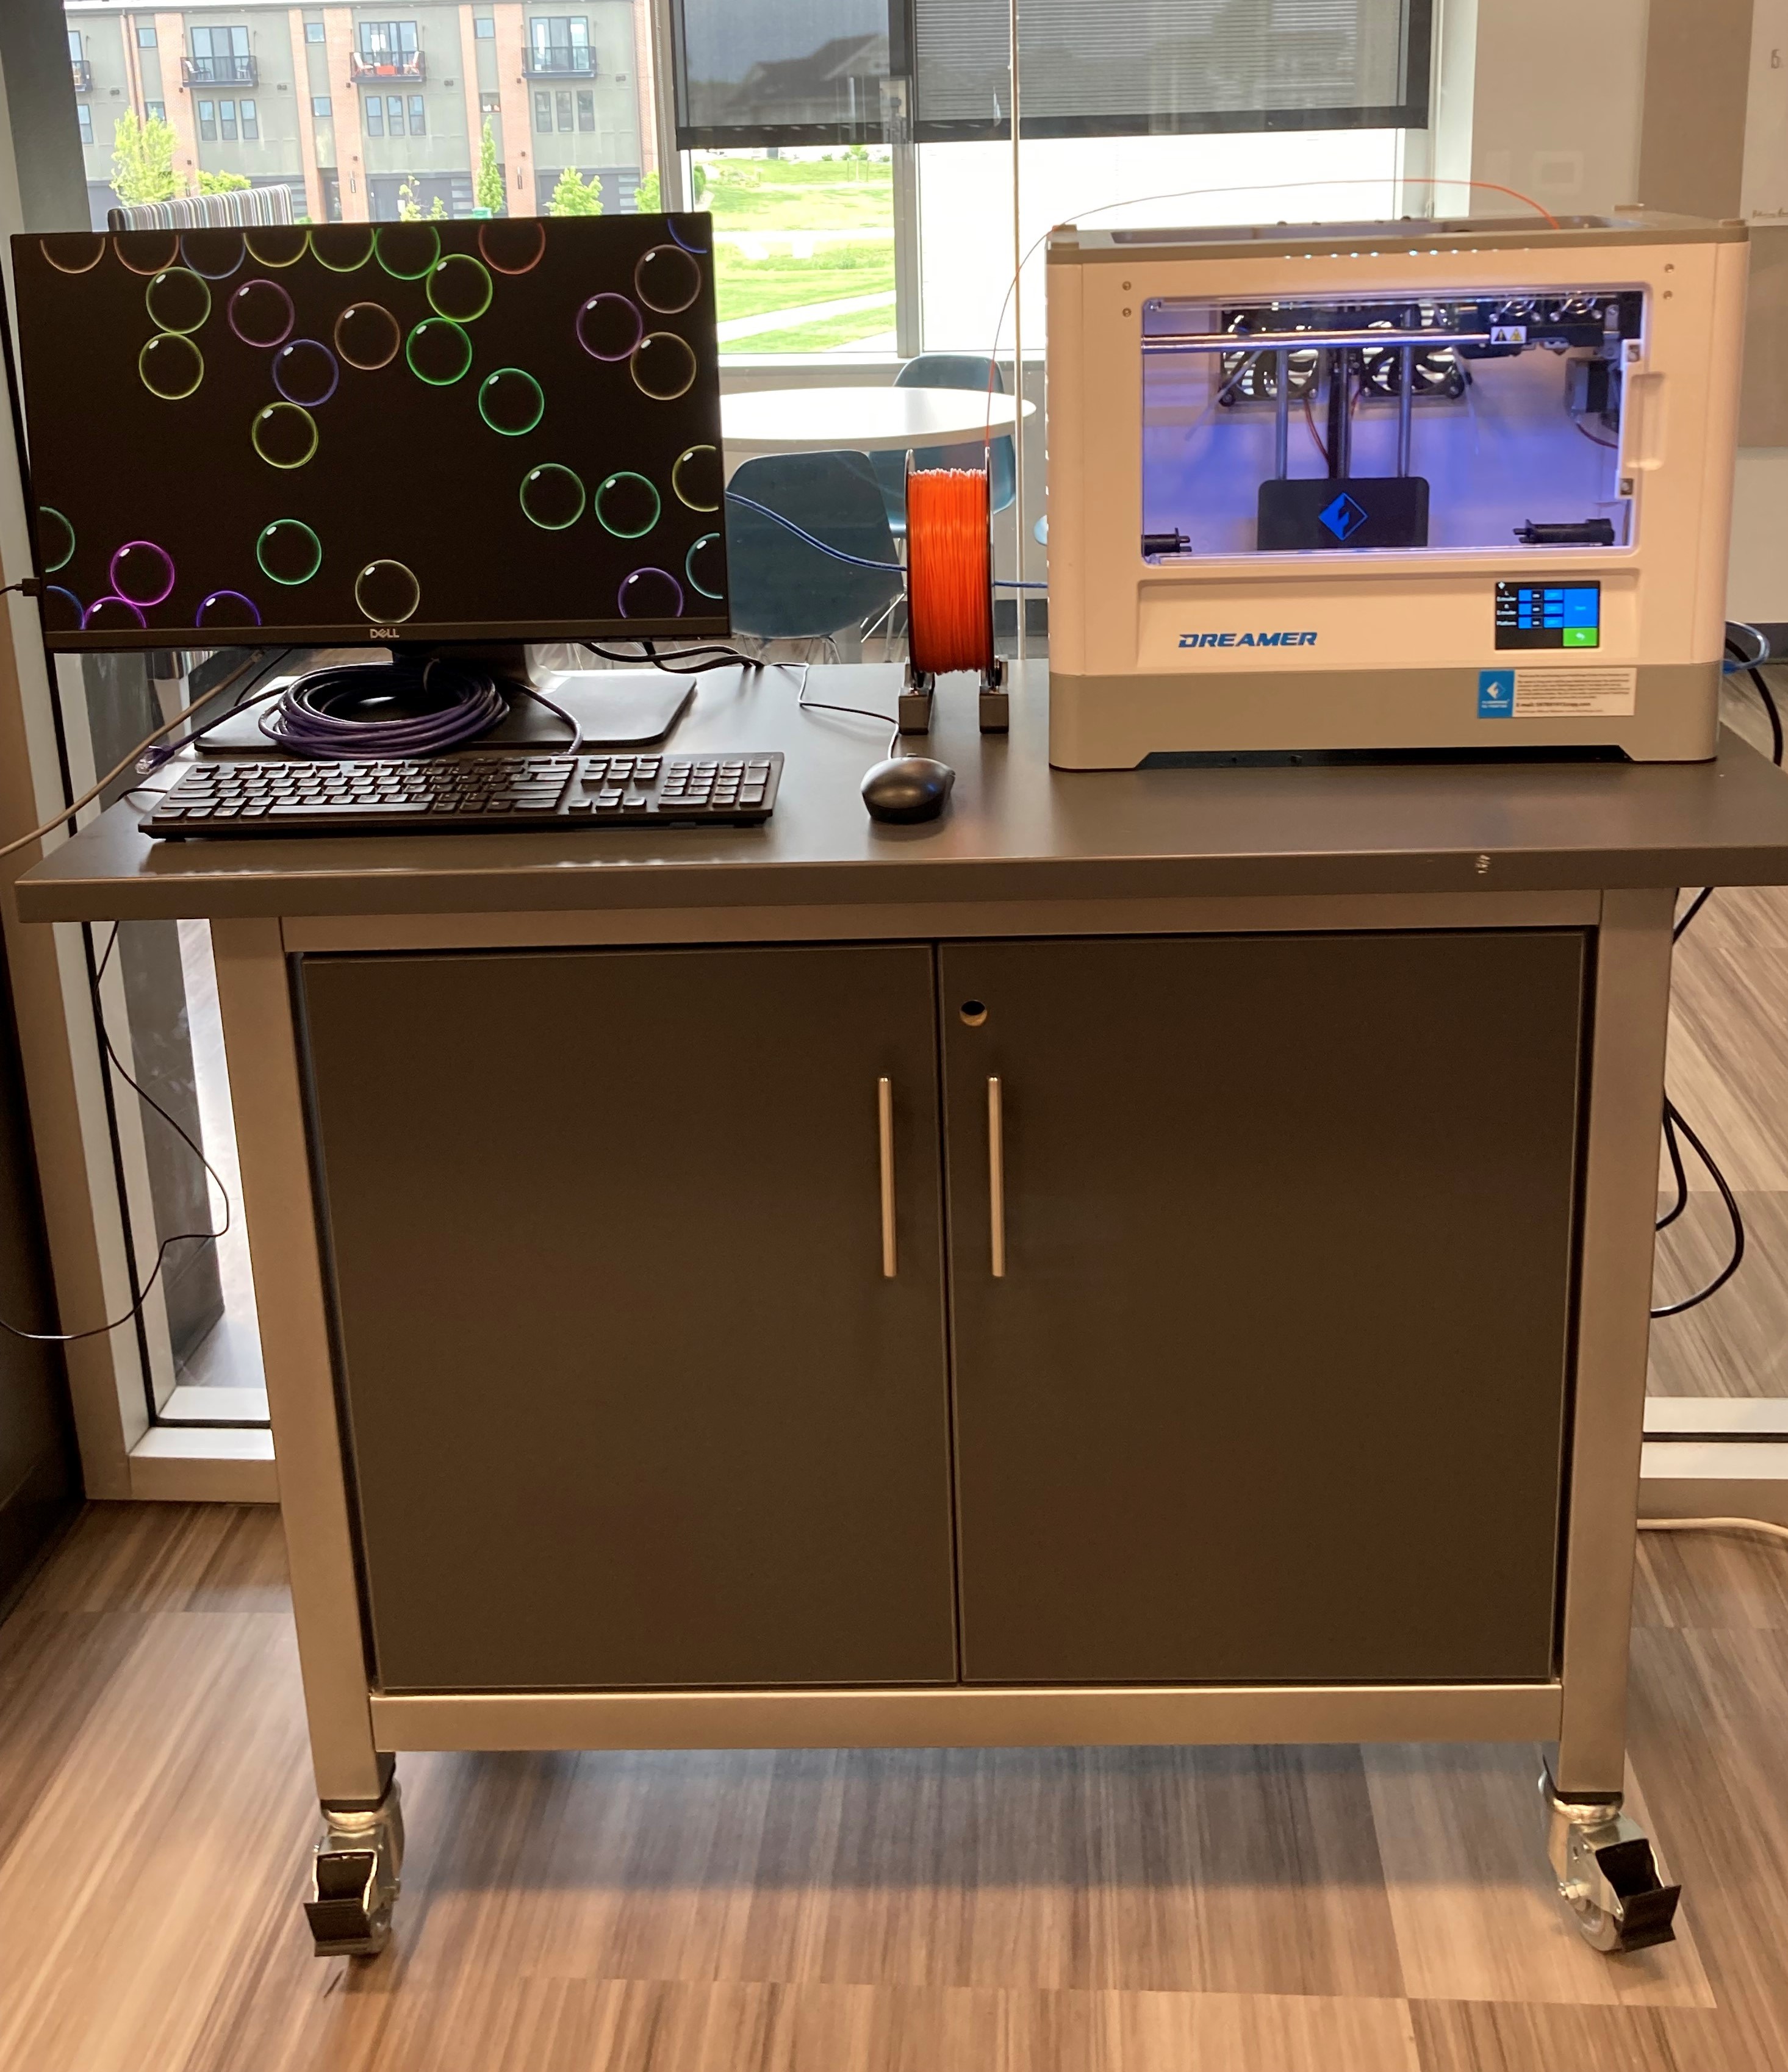 Makerspace 3D Printing Station Ankeny Kirkendall Public Library